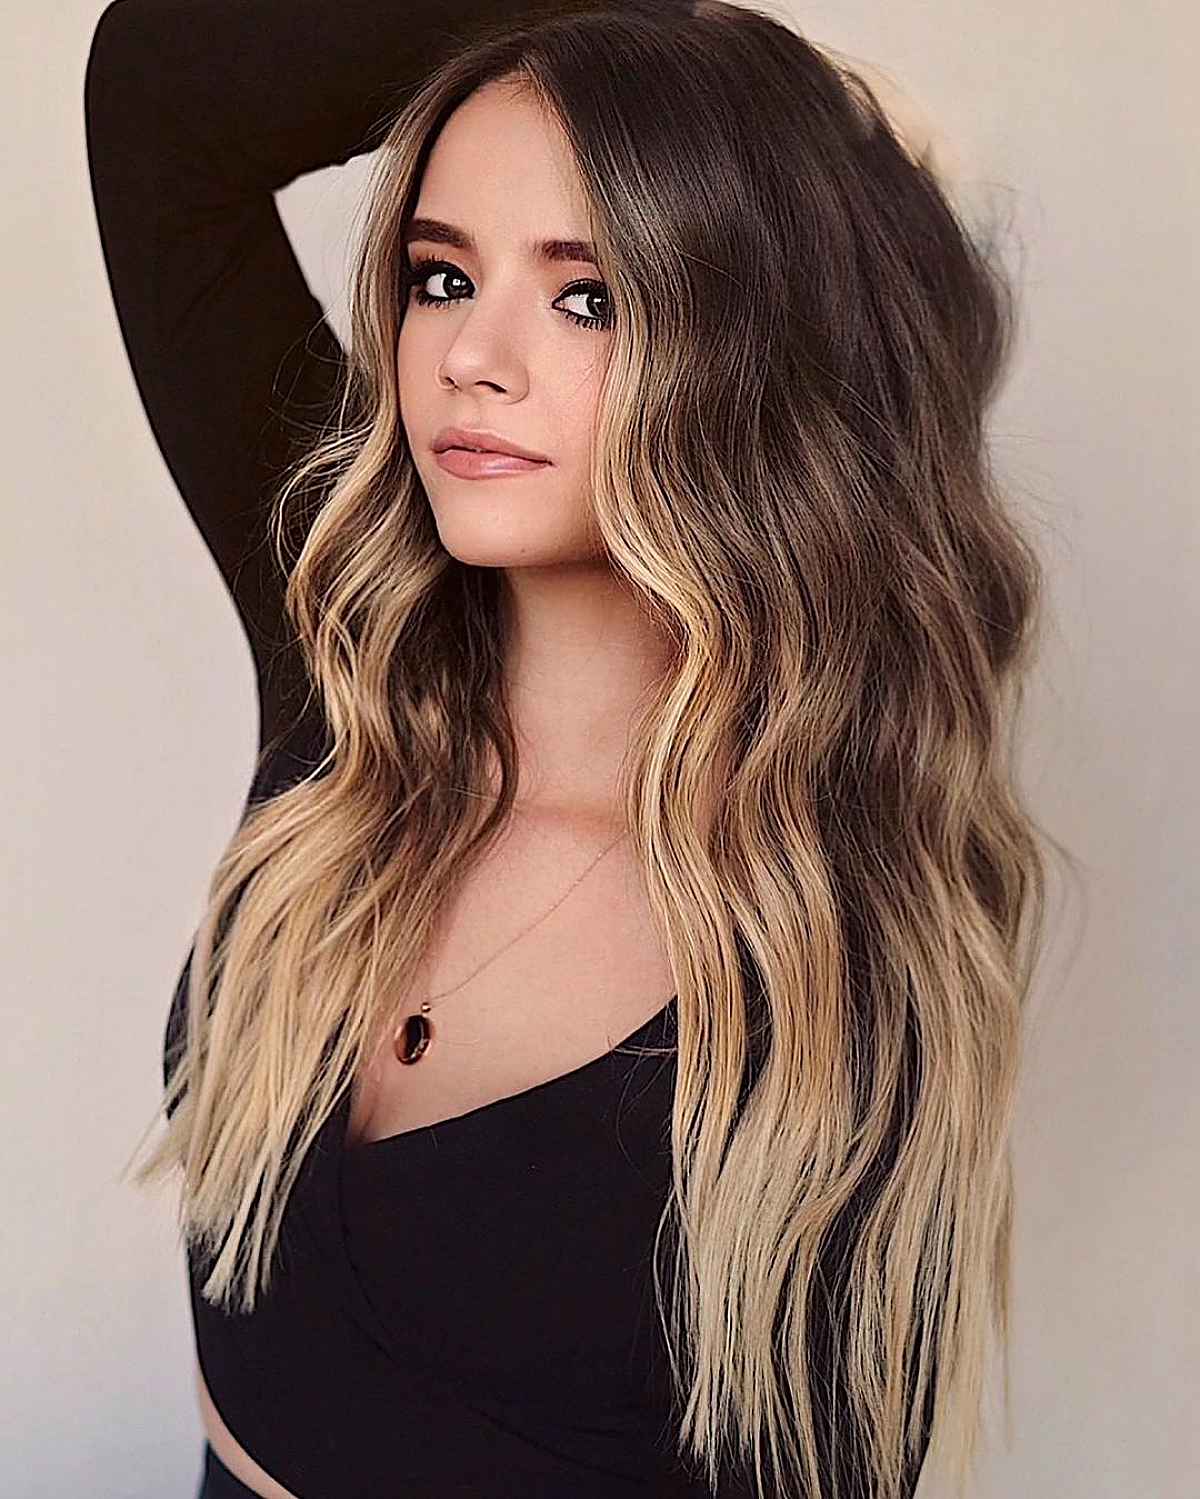 31 Hottest Long Brown Hair Ideas for Women in 2023